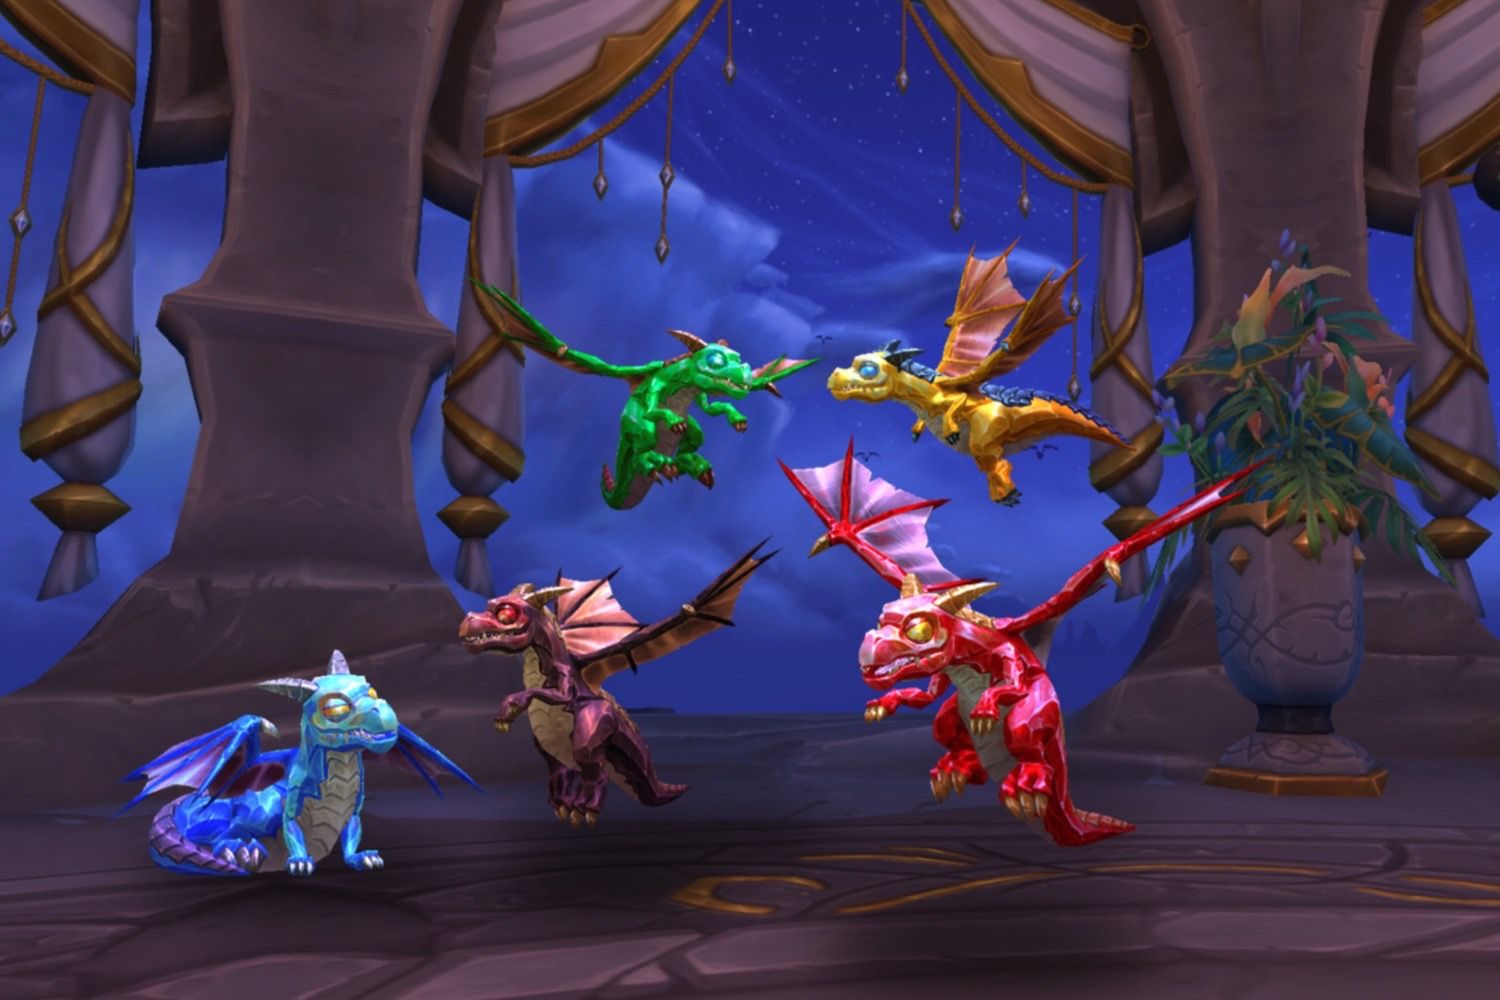 Five whelpling pets flying around together.